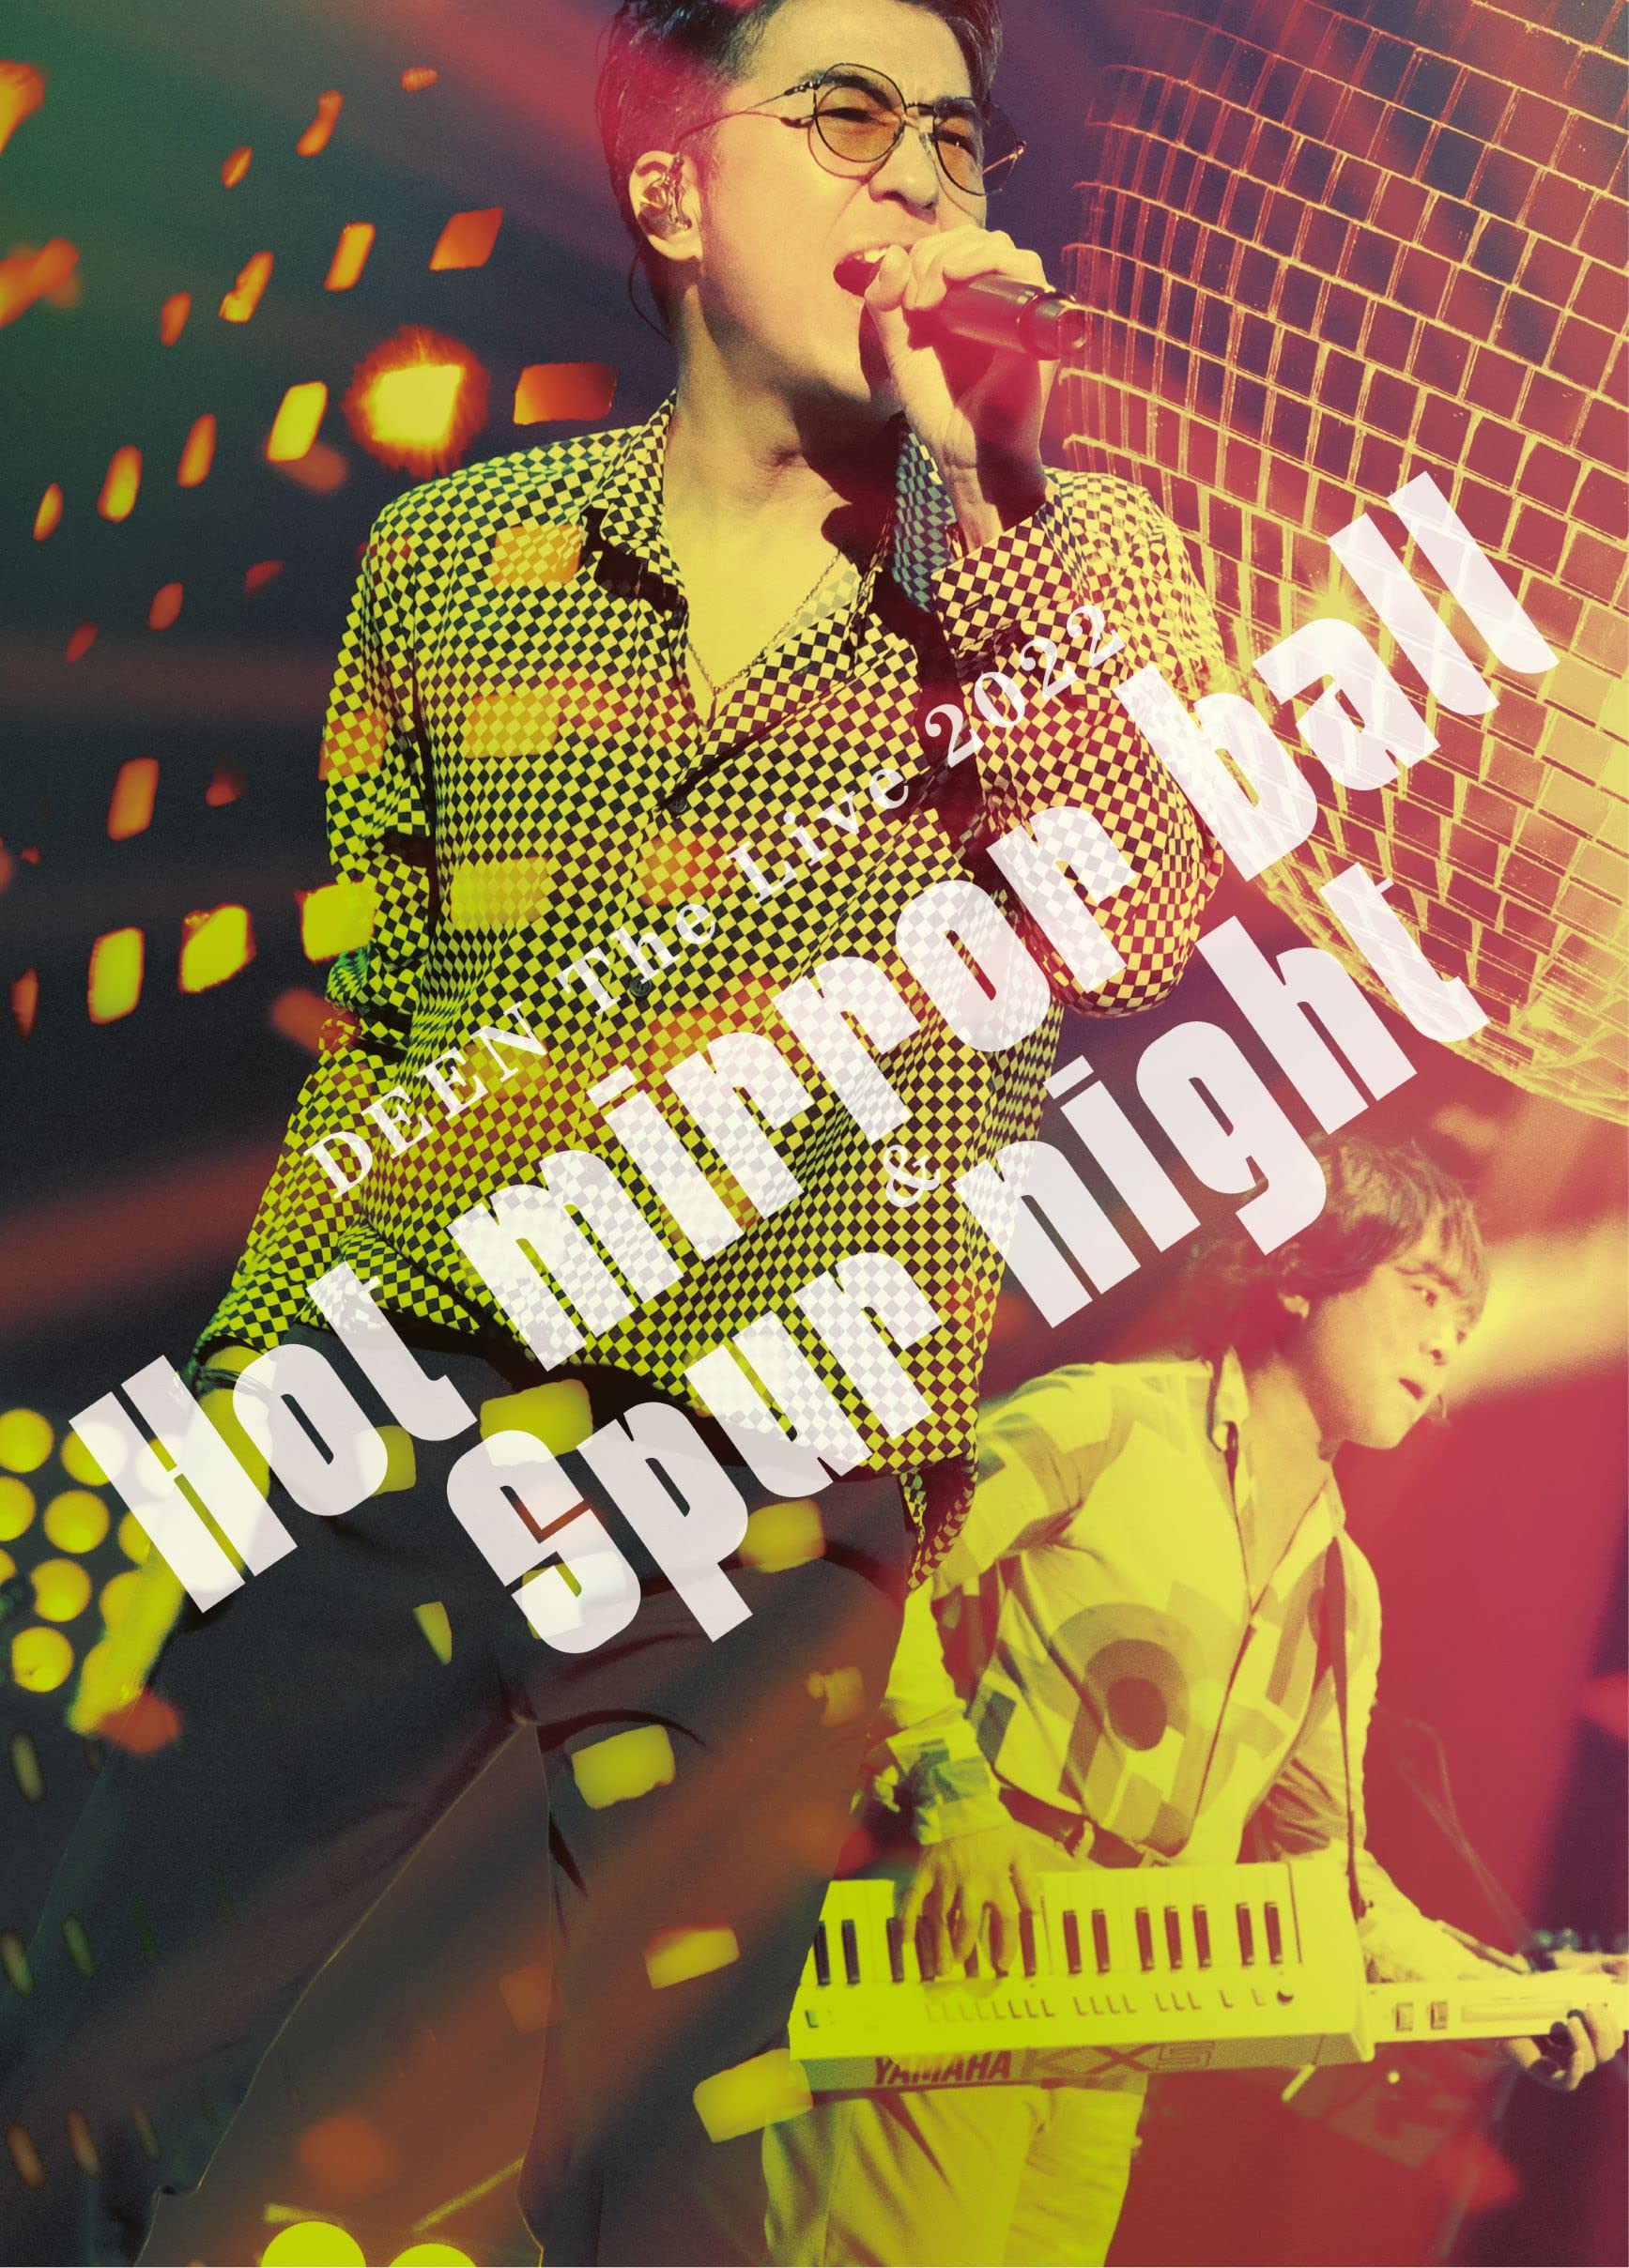 DEEN The Live 2022 ~Hot mirror ball Spur night~ (完全生産限定盤) (2Blu-ray+2CD) (特典なし)